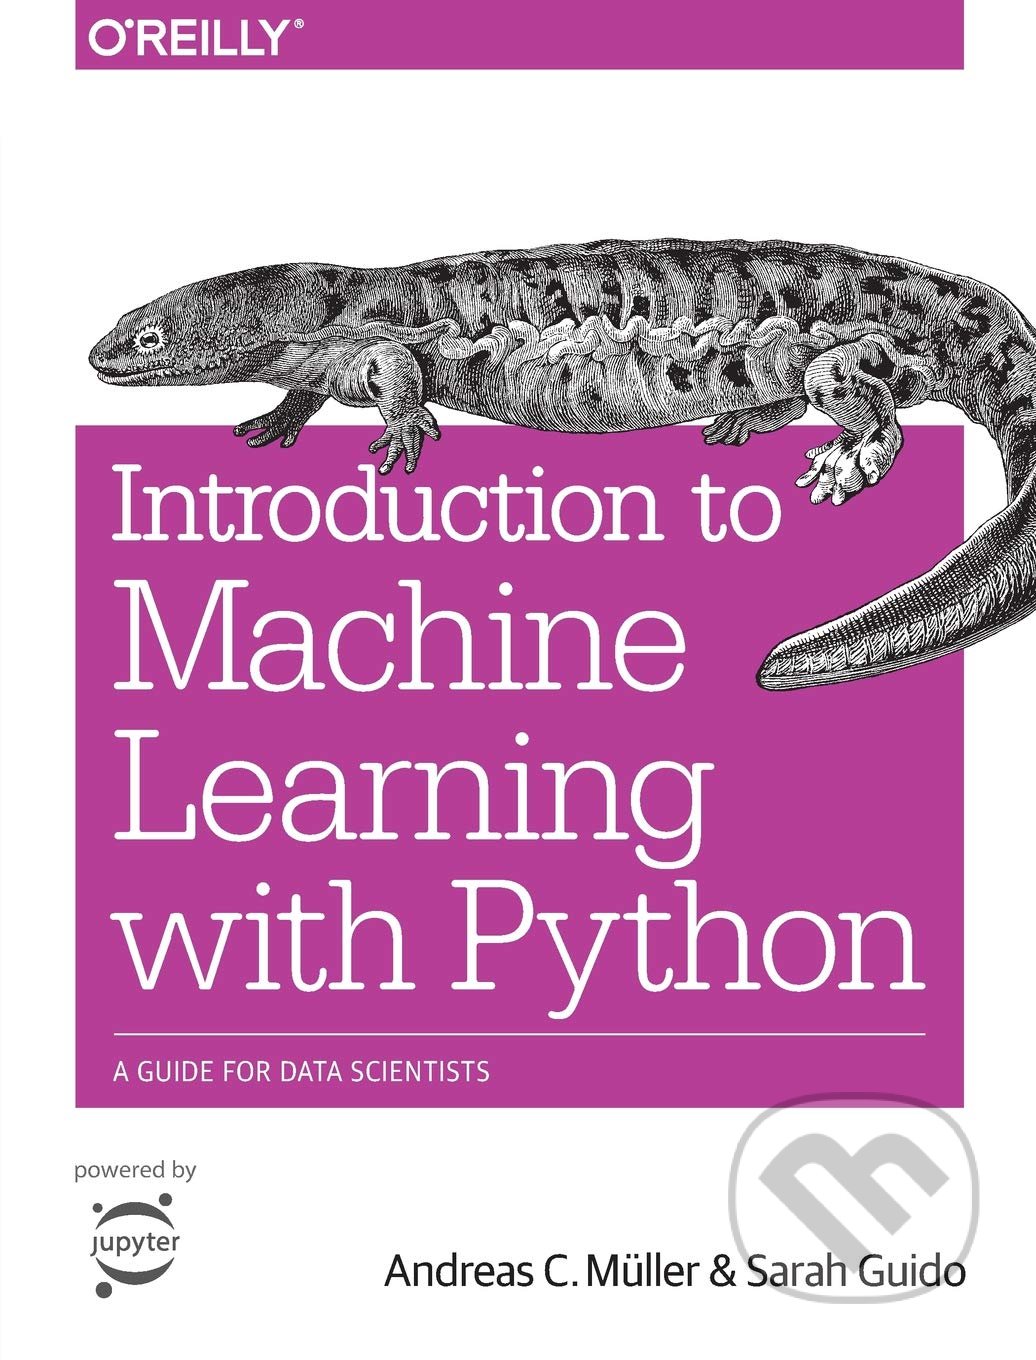 Introduction to Machine Learning with Python - Andreas C. Müller, Sarah Guido, O´Reilly, 2016